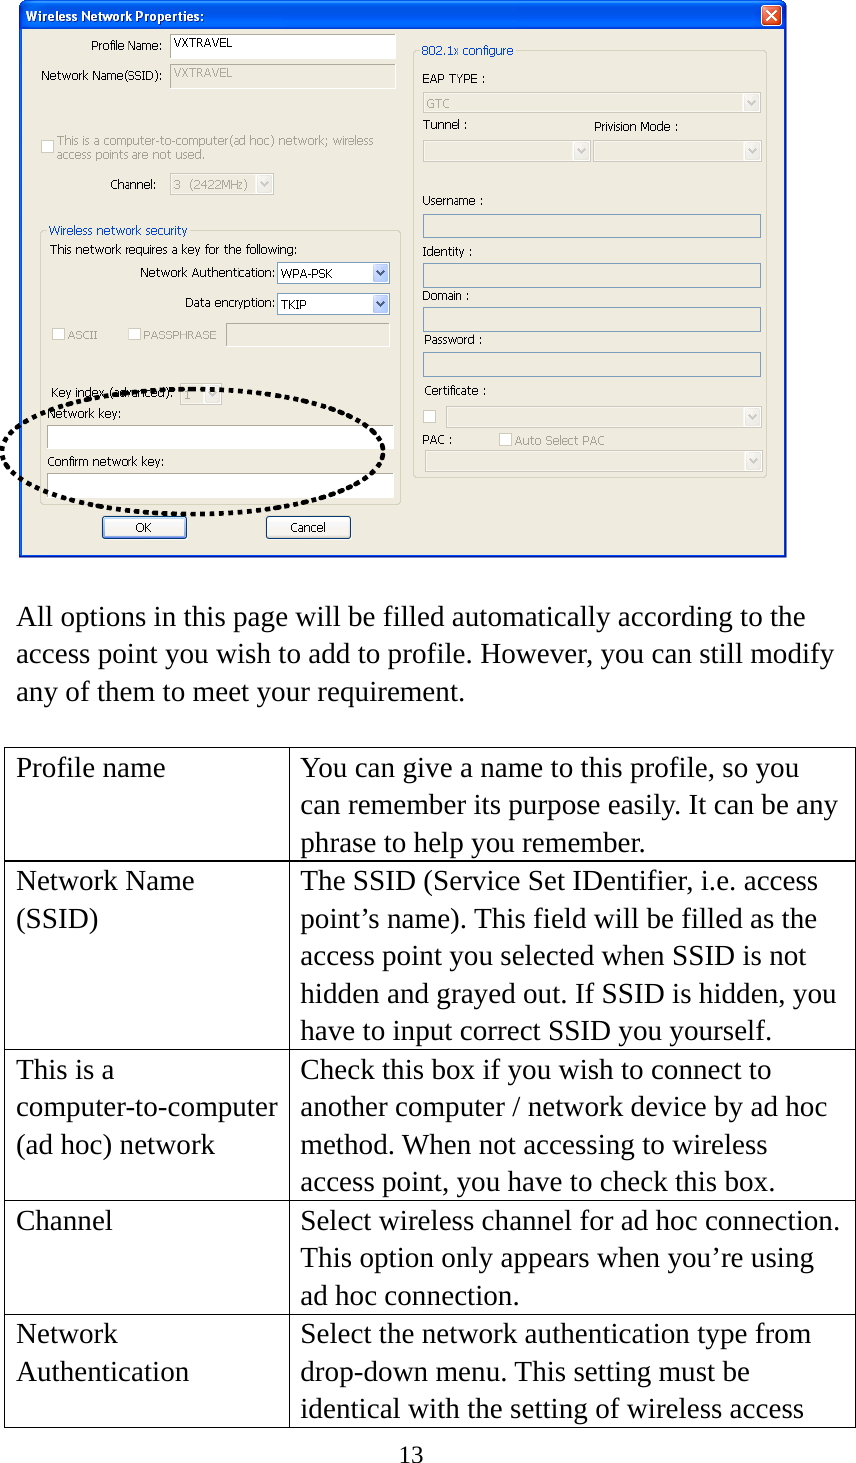 13    All options in this page will be filled automatically according to the access point you wish to add to profile. However, you can still modify any of them to meet your requirement.  Profile name  You can give a name to this profile, so you can remember its purpose easily. It can be any phrase to help you remember. Network Name (SSID) The SSID (Service Set IDentifier, i.e. access point’s name). This field will be filled as the access point you selected when SSID is not hidden and grayed out. If SSID is hidden, you have to input correct SSID you yourself. This is a computer-to-computer (ad hoc) network Check this box if you wish to connect to another computer / network device by ad hoc method. When not accessing to wireless access point, you have to check this box. Channel Select wireless channel for ad hoc connection. This option only appears when you’re using ad hoc connection. Network  Authentication Select the network authentication type from drop-down menu. This setting must be identical with the setting of wireless access 